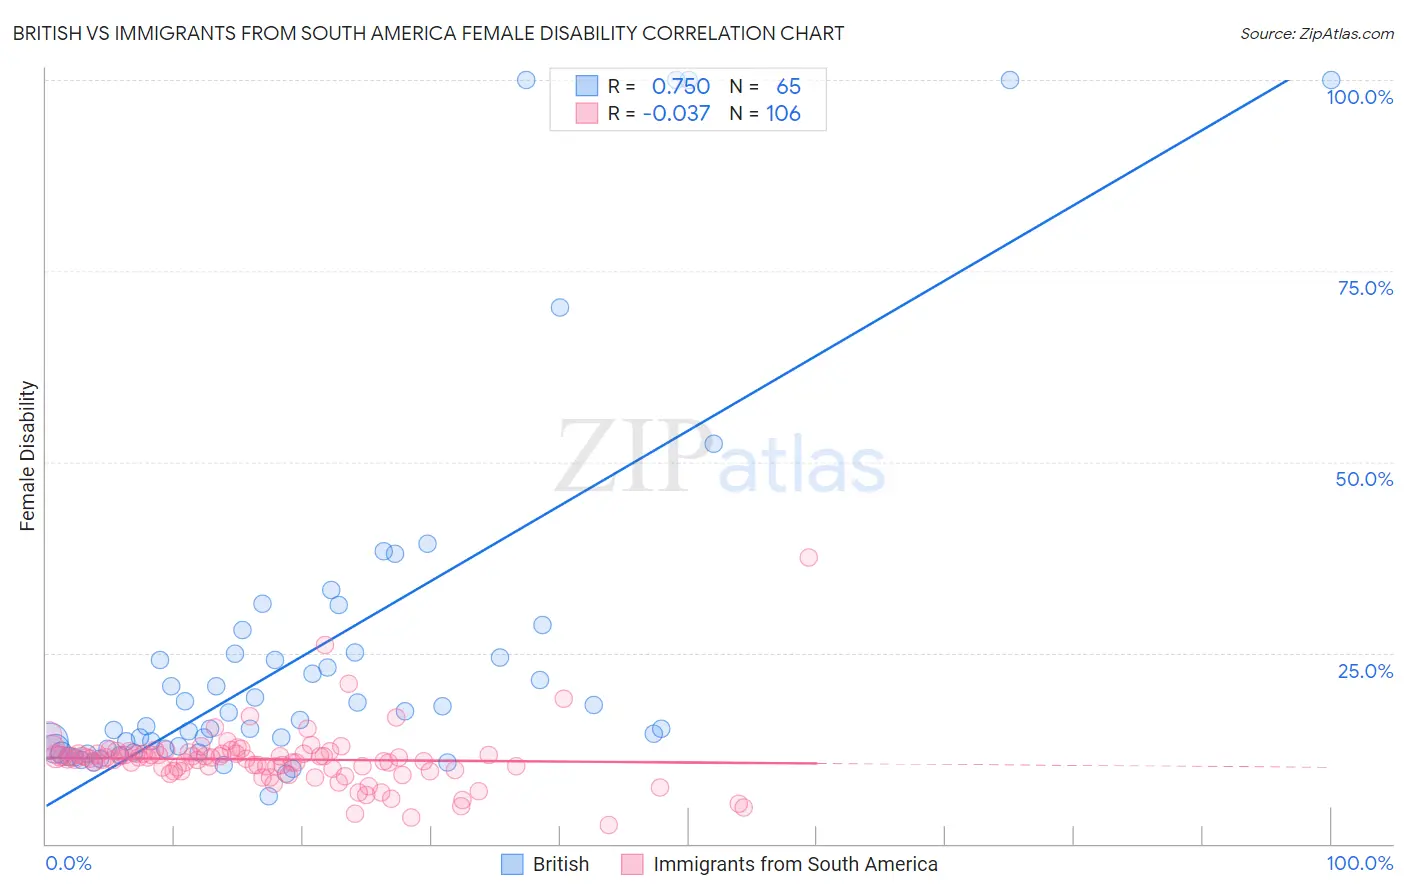 British vs Immigrants from South America Female Disability